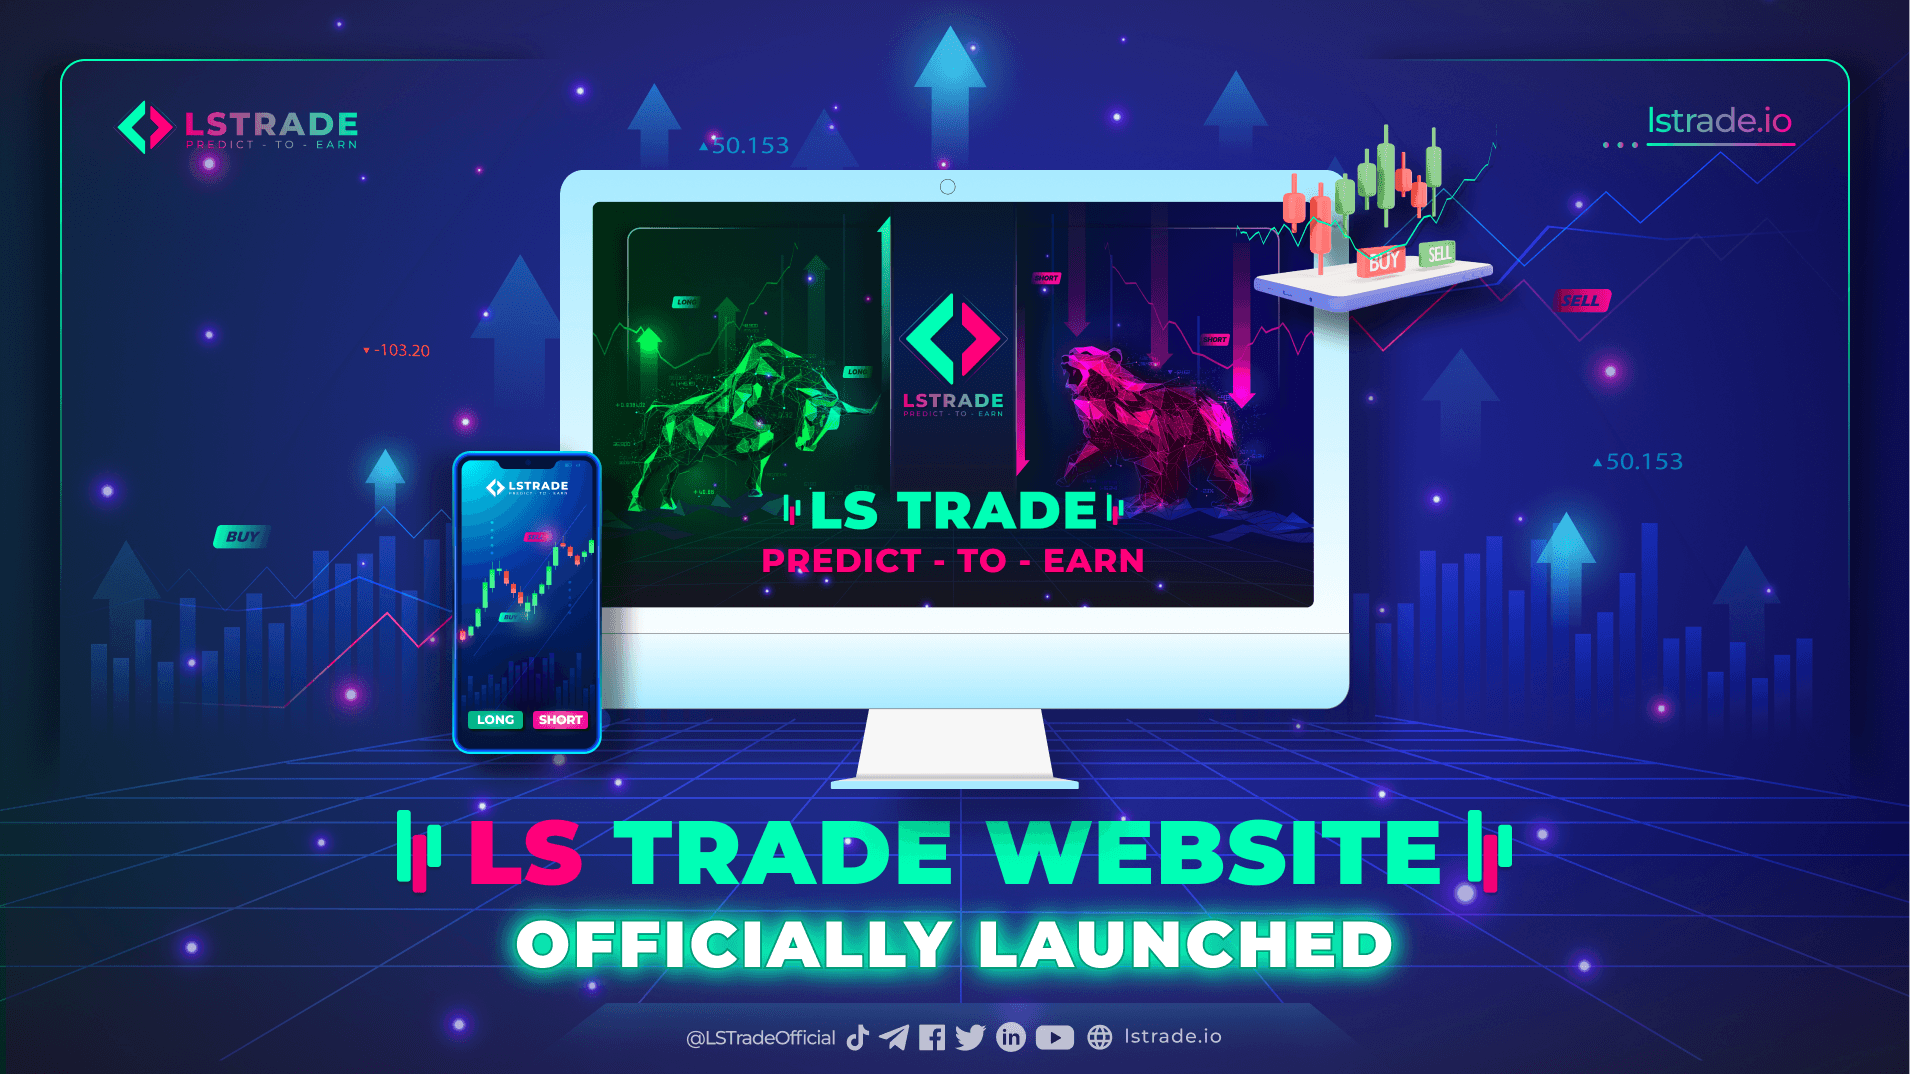 LS TRADE - PREDICT-TO-EARN PLATFORM, A COLLABORATIVE PRODUCT WITH 3S WALLET - LAUNCHED OFFICIAL WEBSITE 🔥